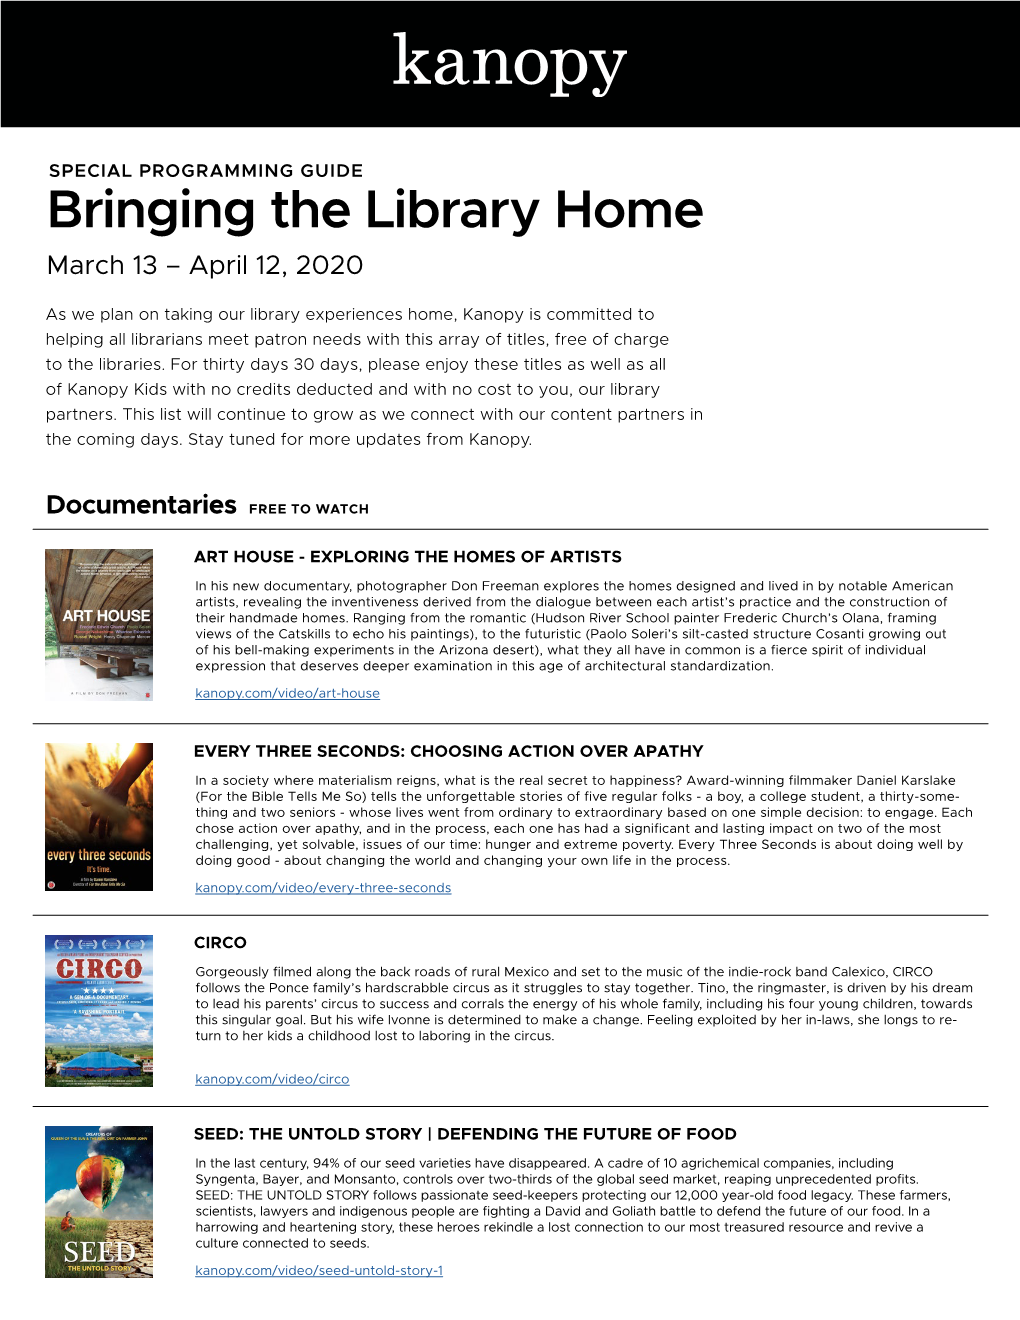 Bringing the Library Home March 13 – April 12, 2020